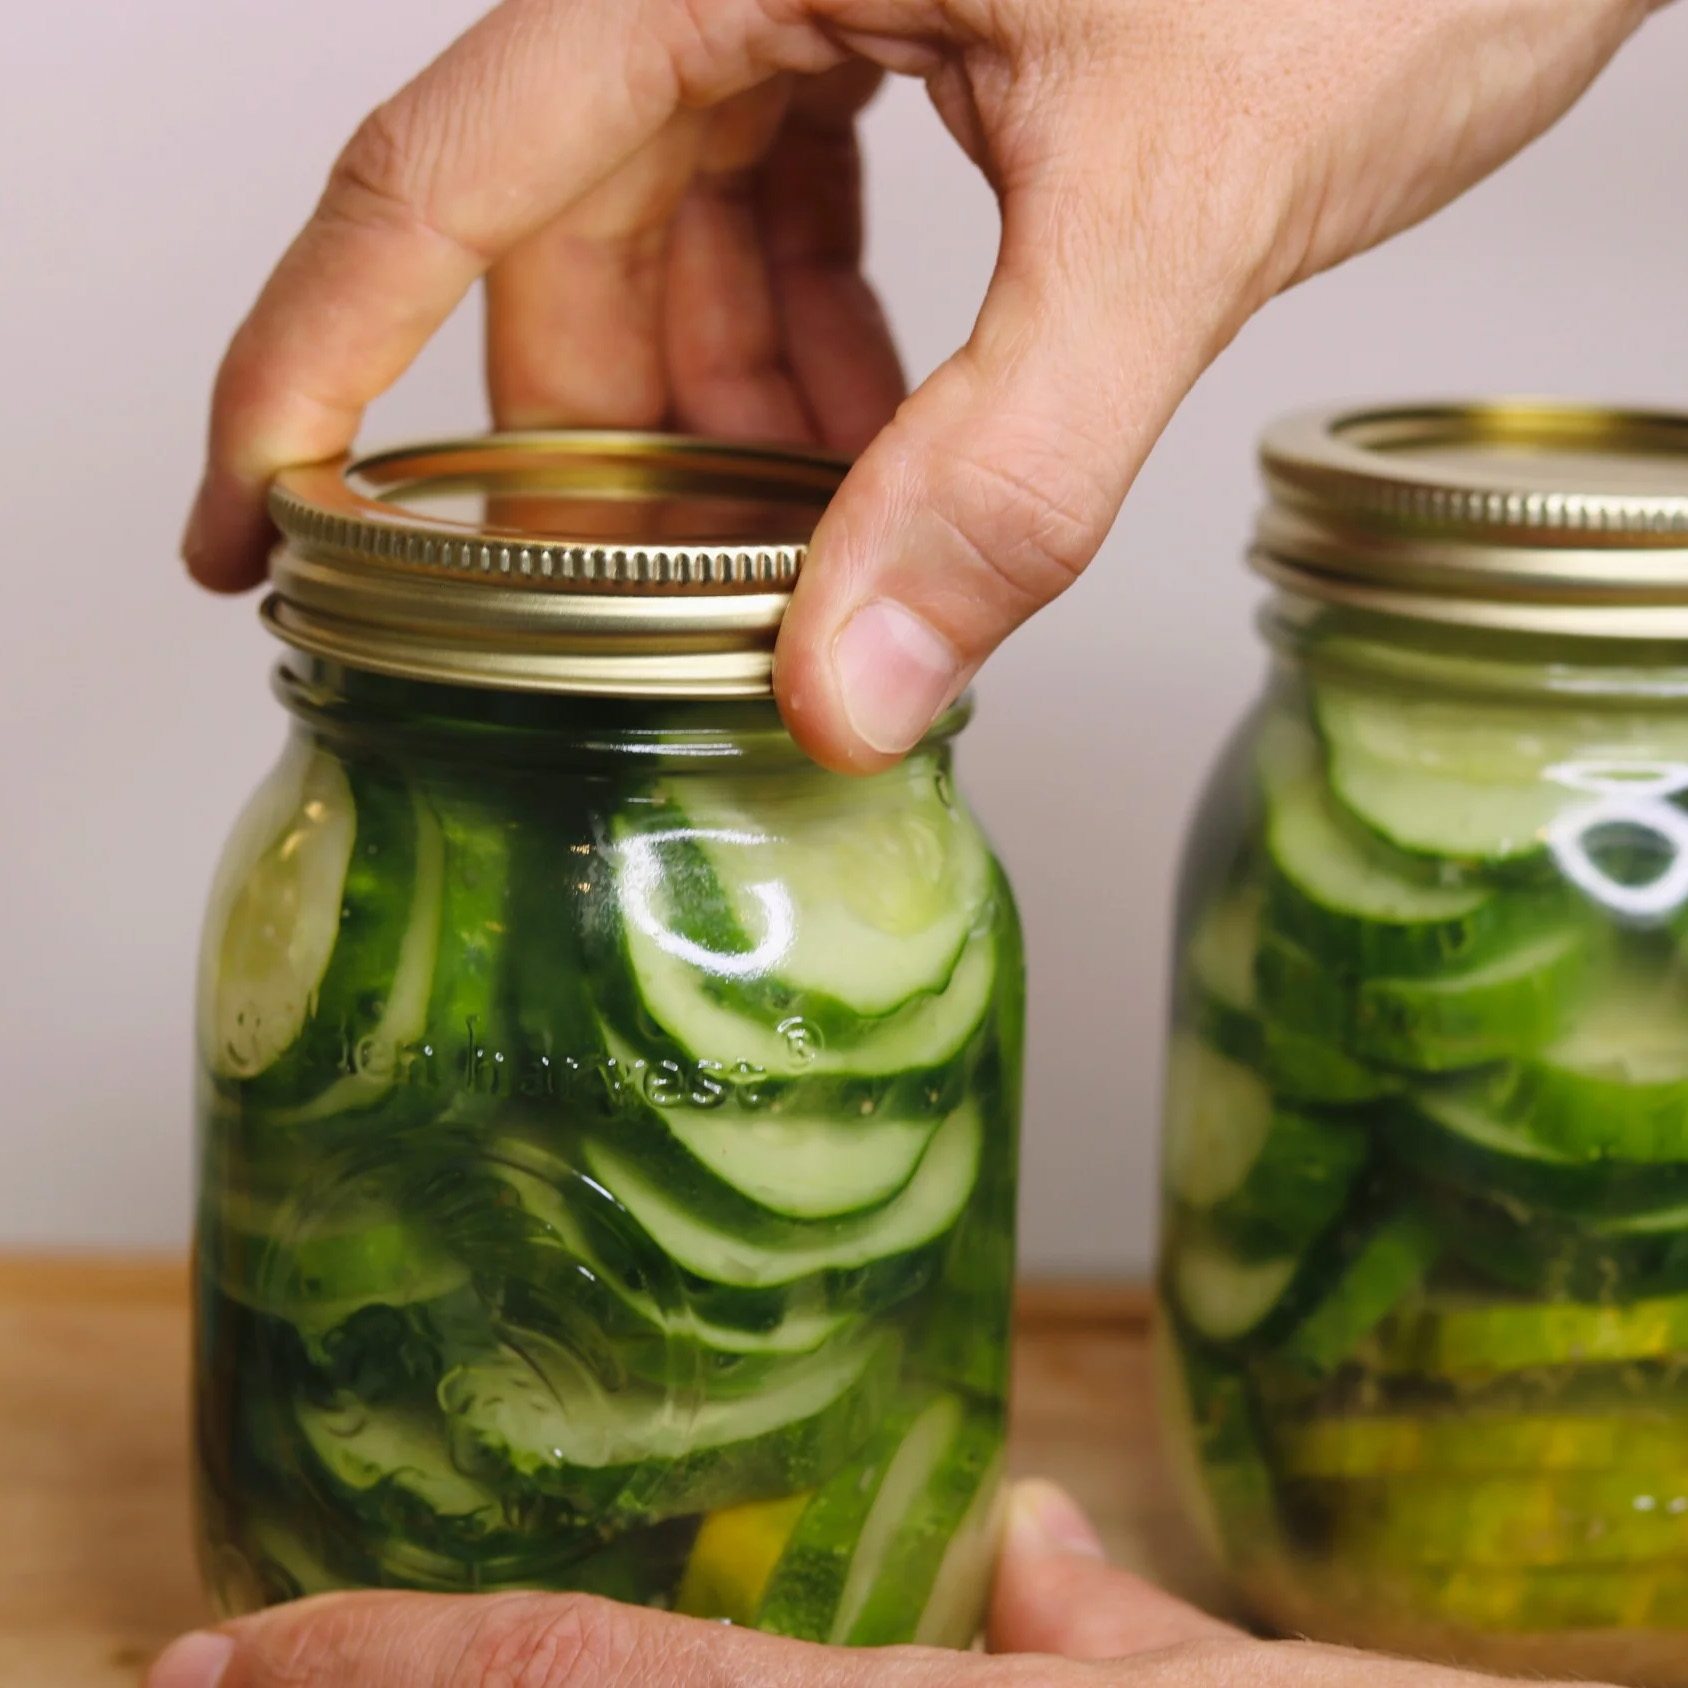 A Step-by-Step Guide to Waterbath Canning